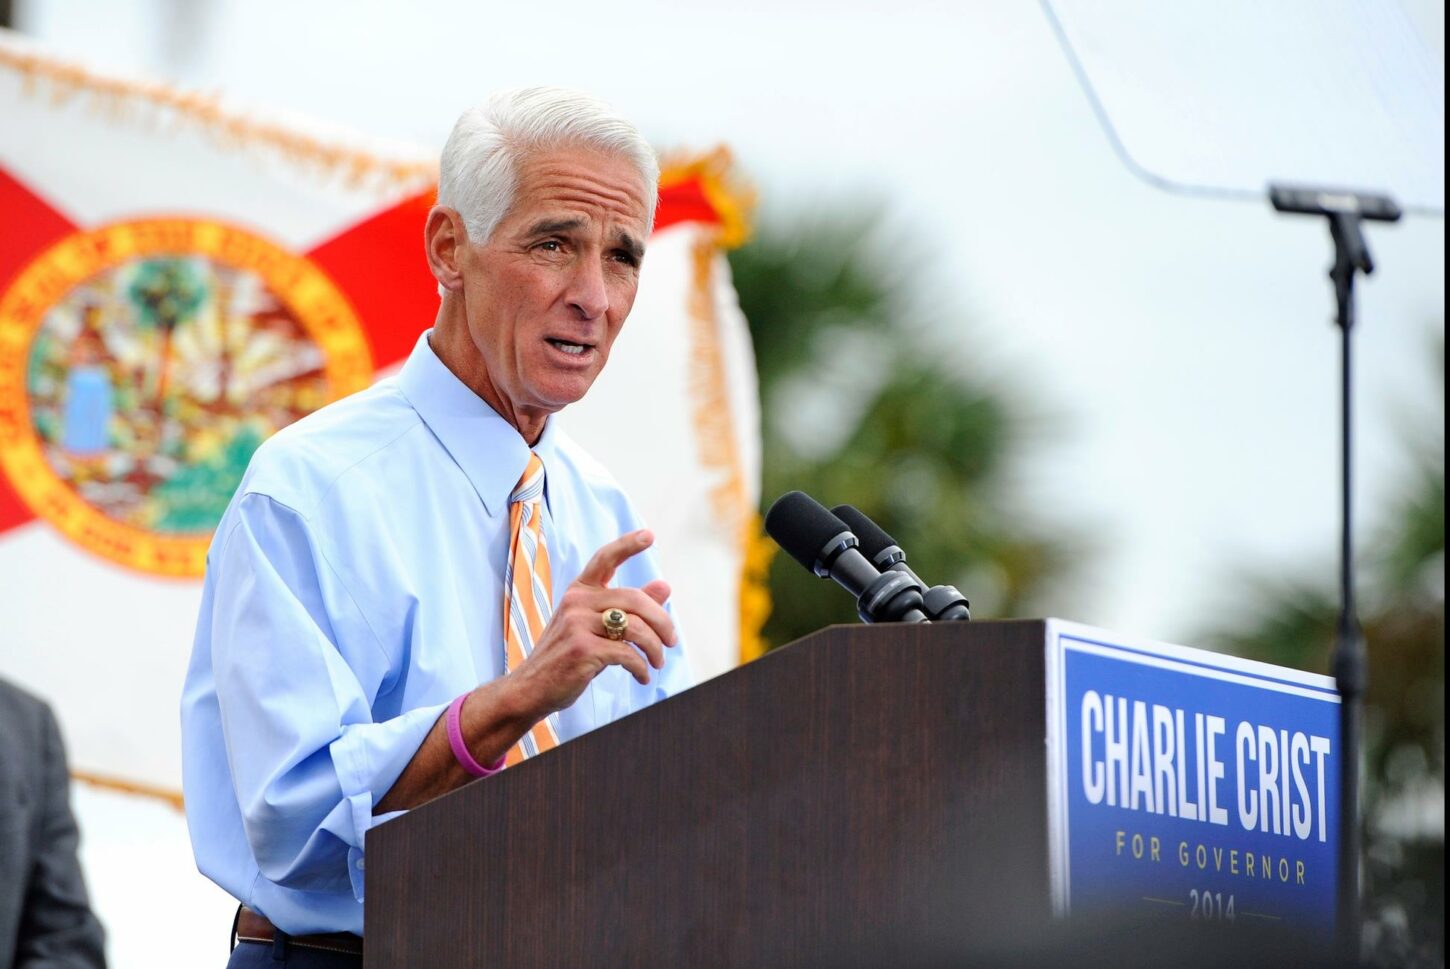 Communications Workers of America Endorse Crist